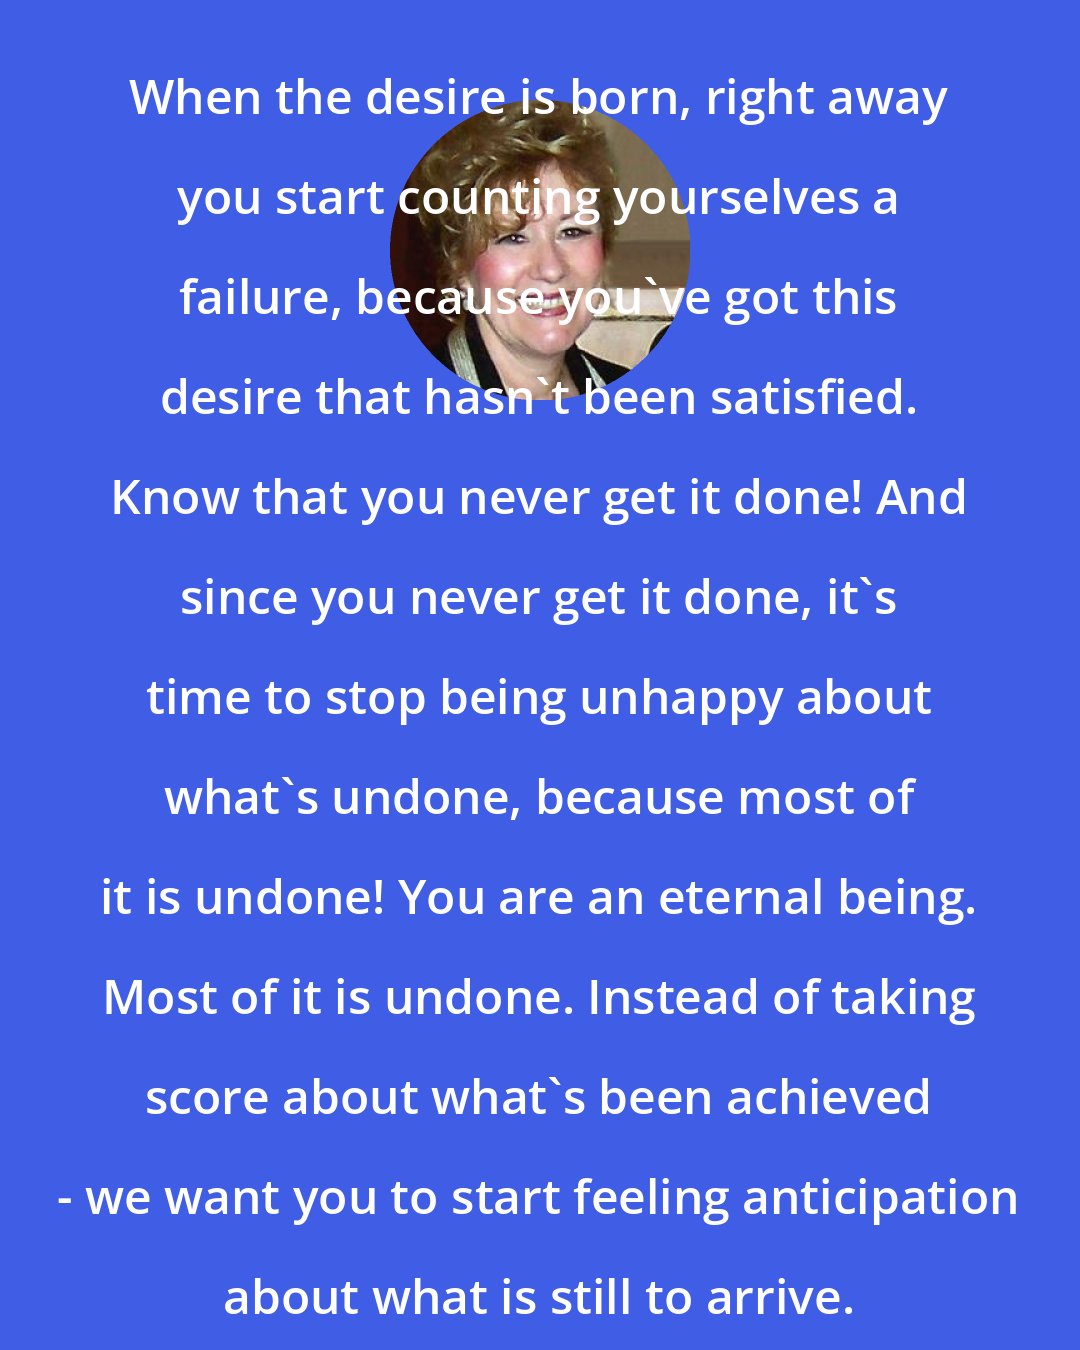 Esther Hicks: When the desire is born, right away you start counting yourselves a failure, because you've got this desire that hasn't been satisfied. Know that you never get it done! And since you never get it done, it's time to stop being unhappy about what's undone, because most of it is undone! You are an eternal being. Most of it is undone. Instead of taking score about what's been achieved - we want you to start feeling anticipation about what is still to arrive.